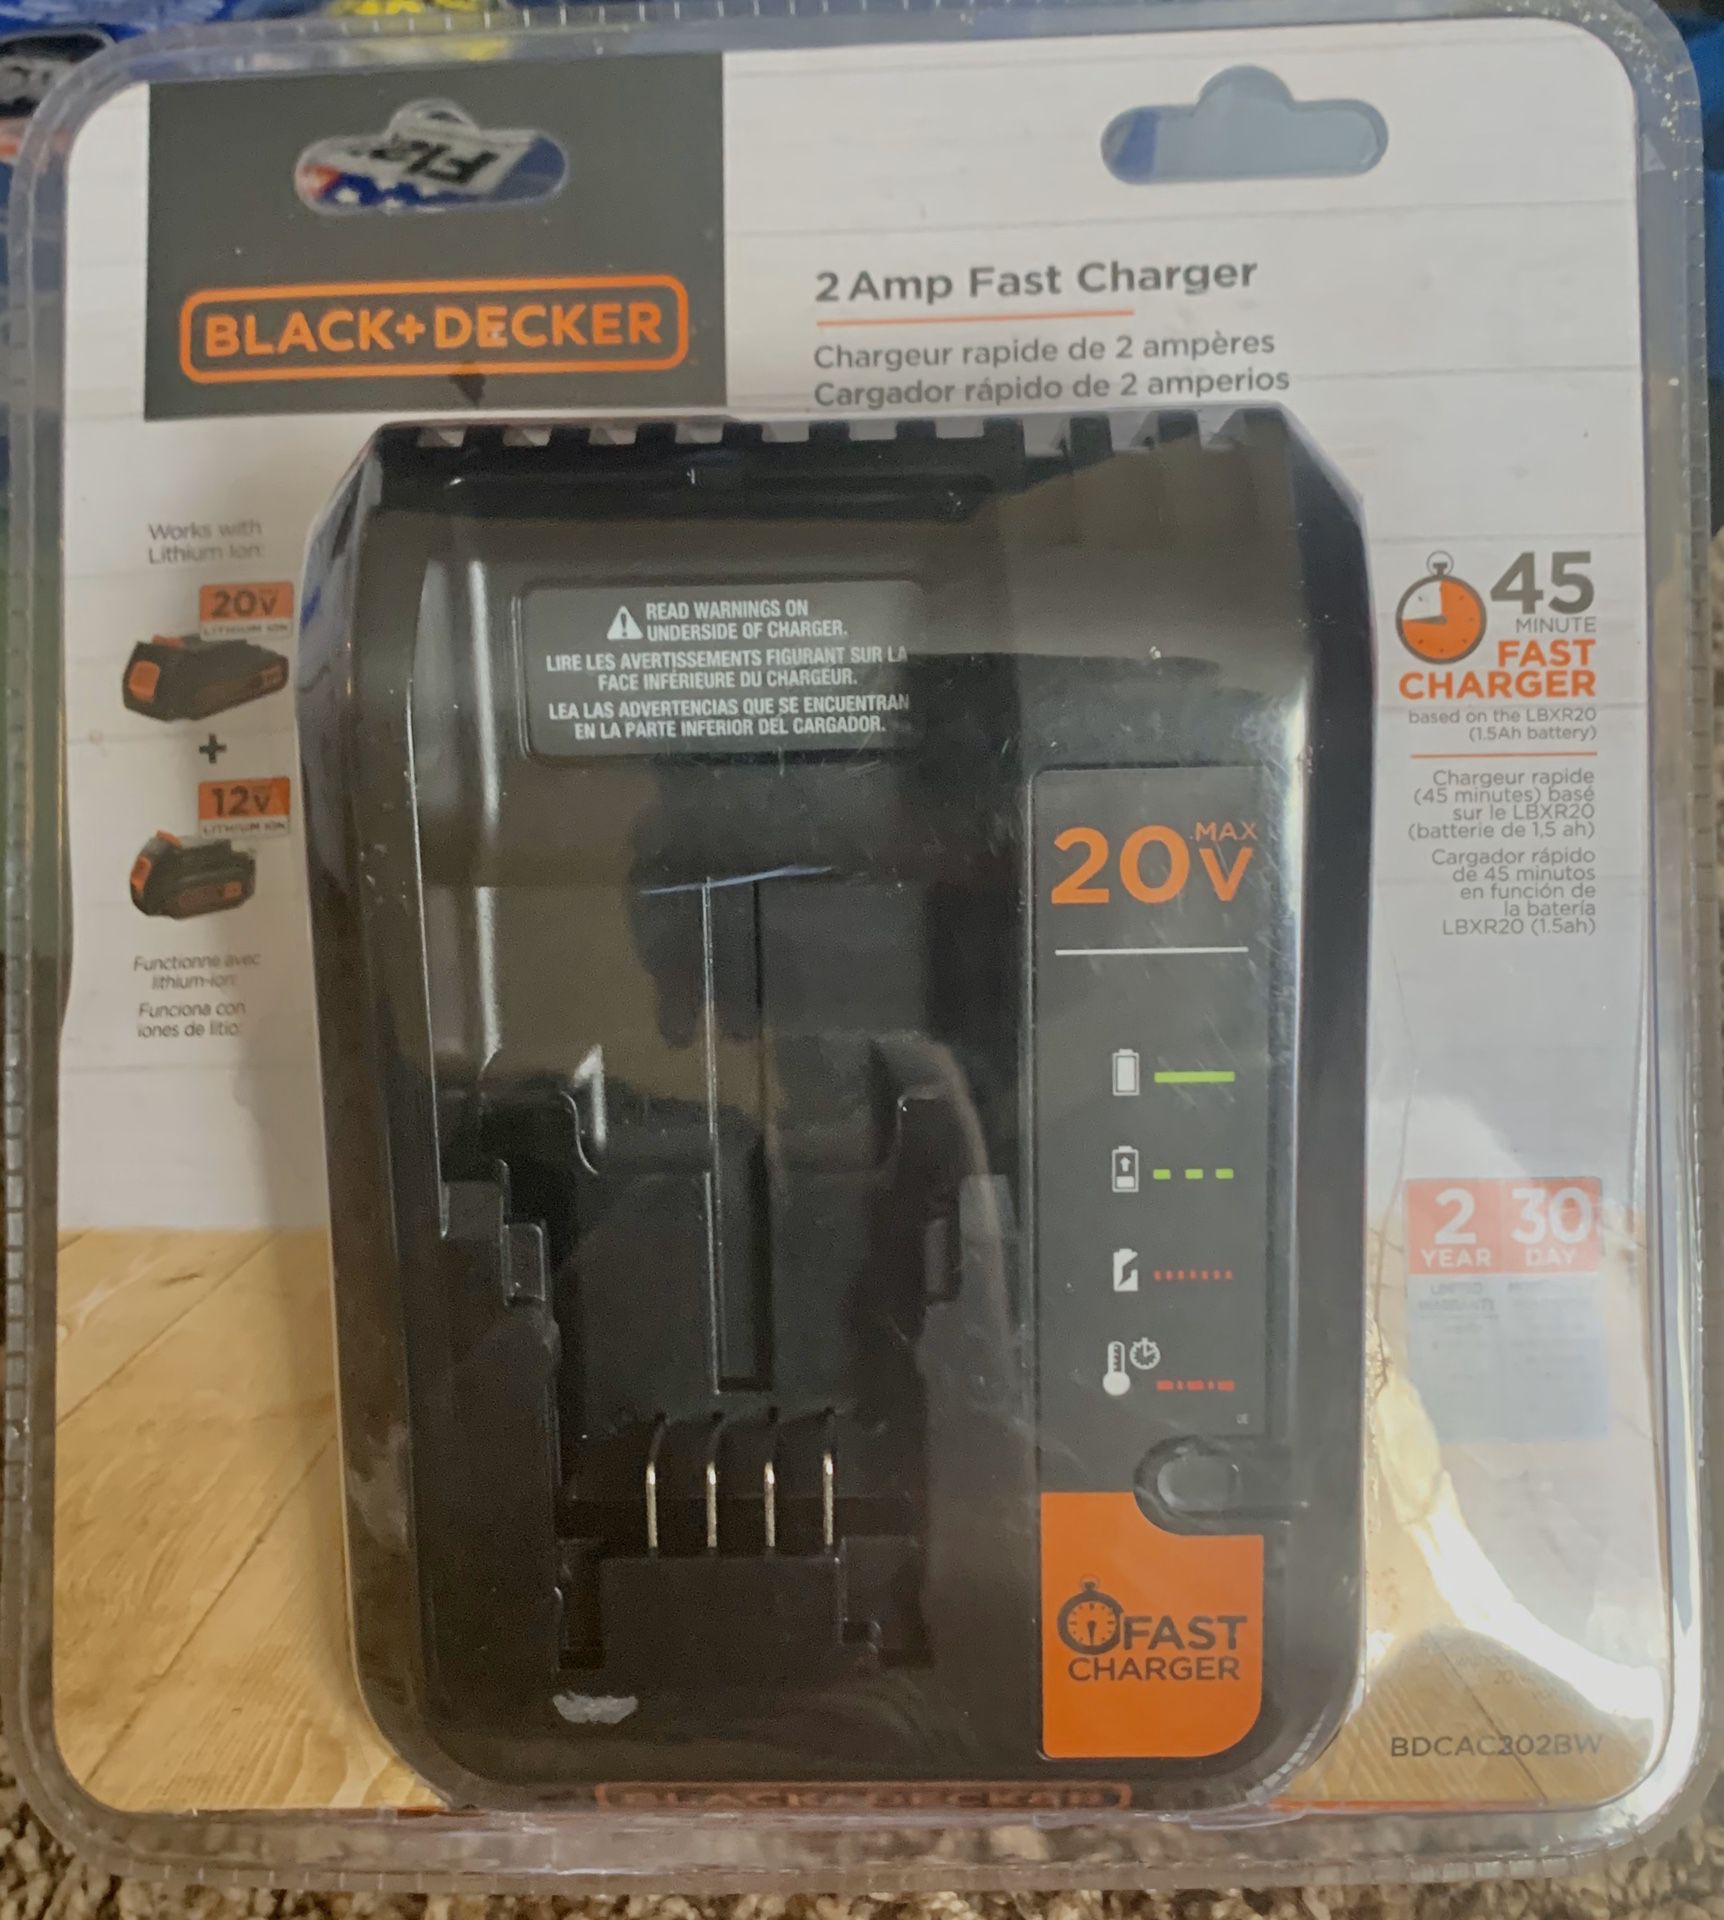 Black and decker 2 amp fast charger